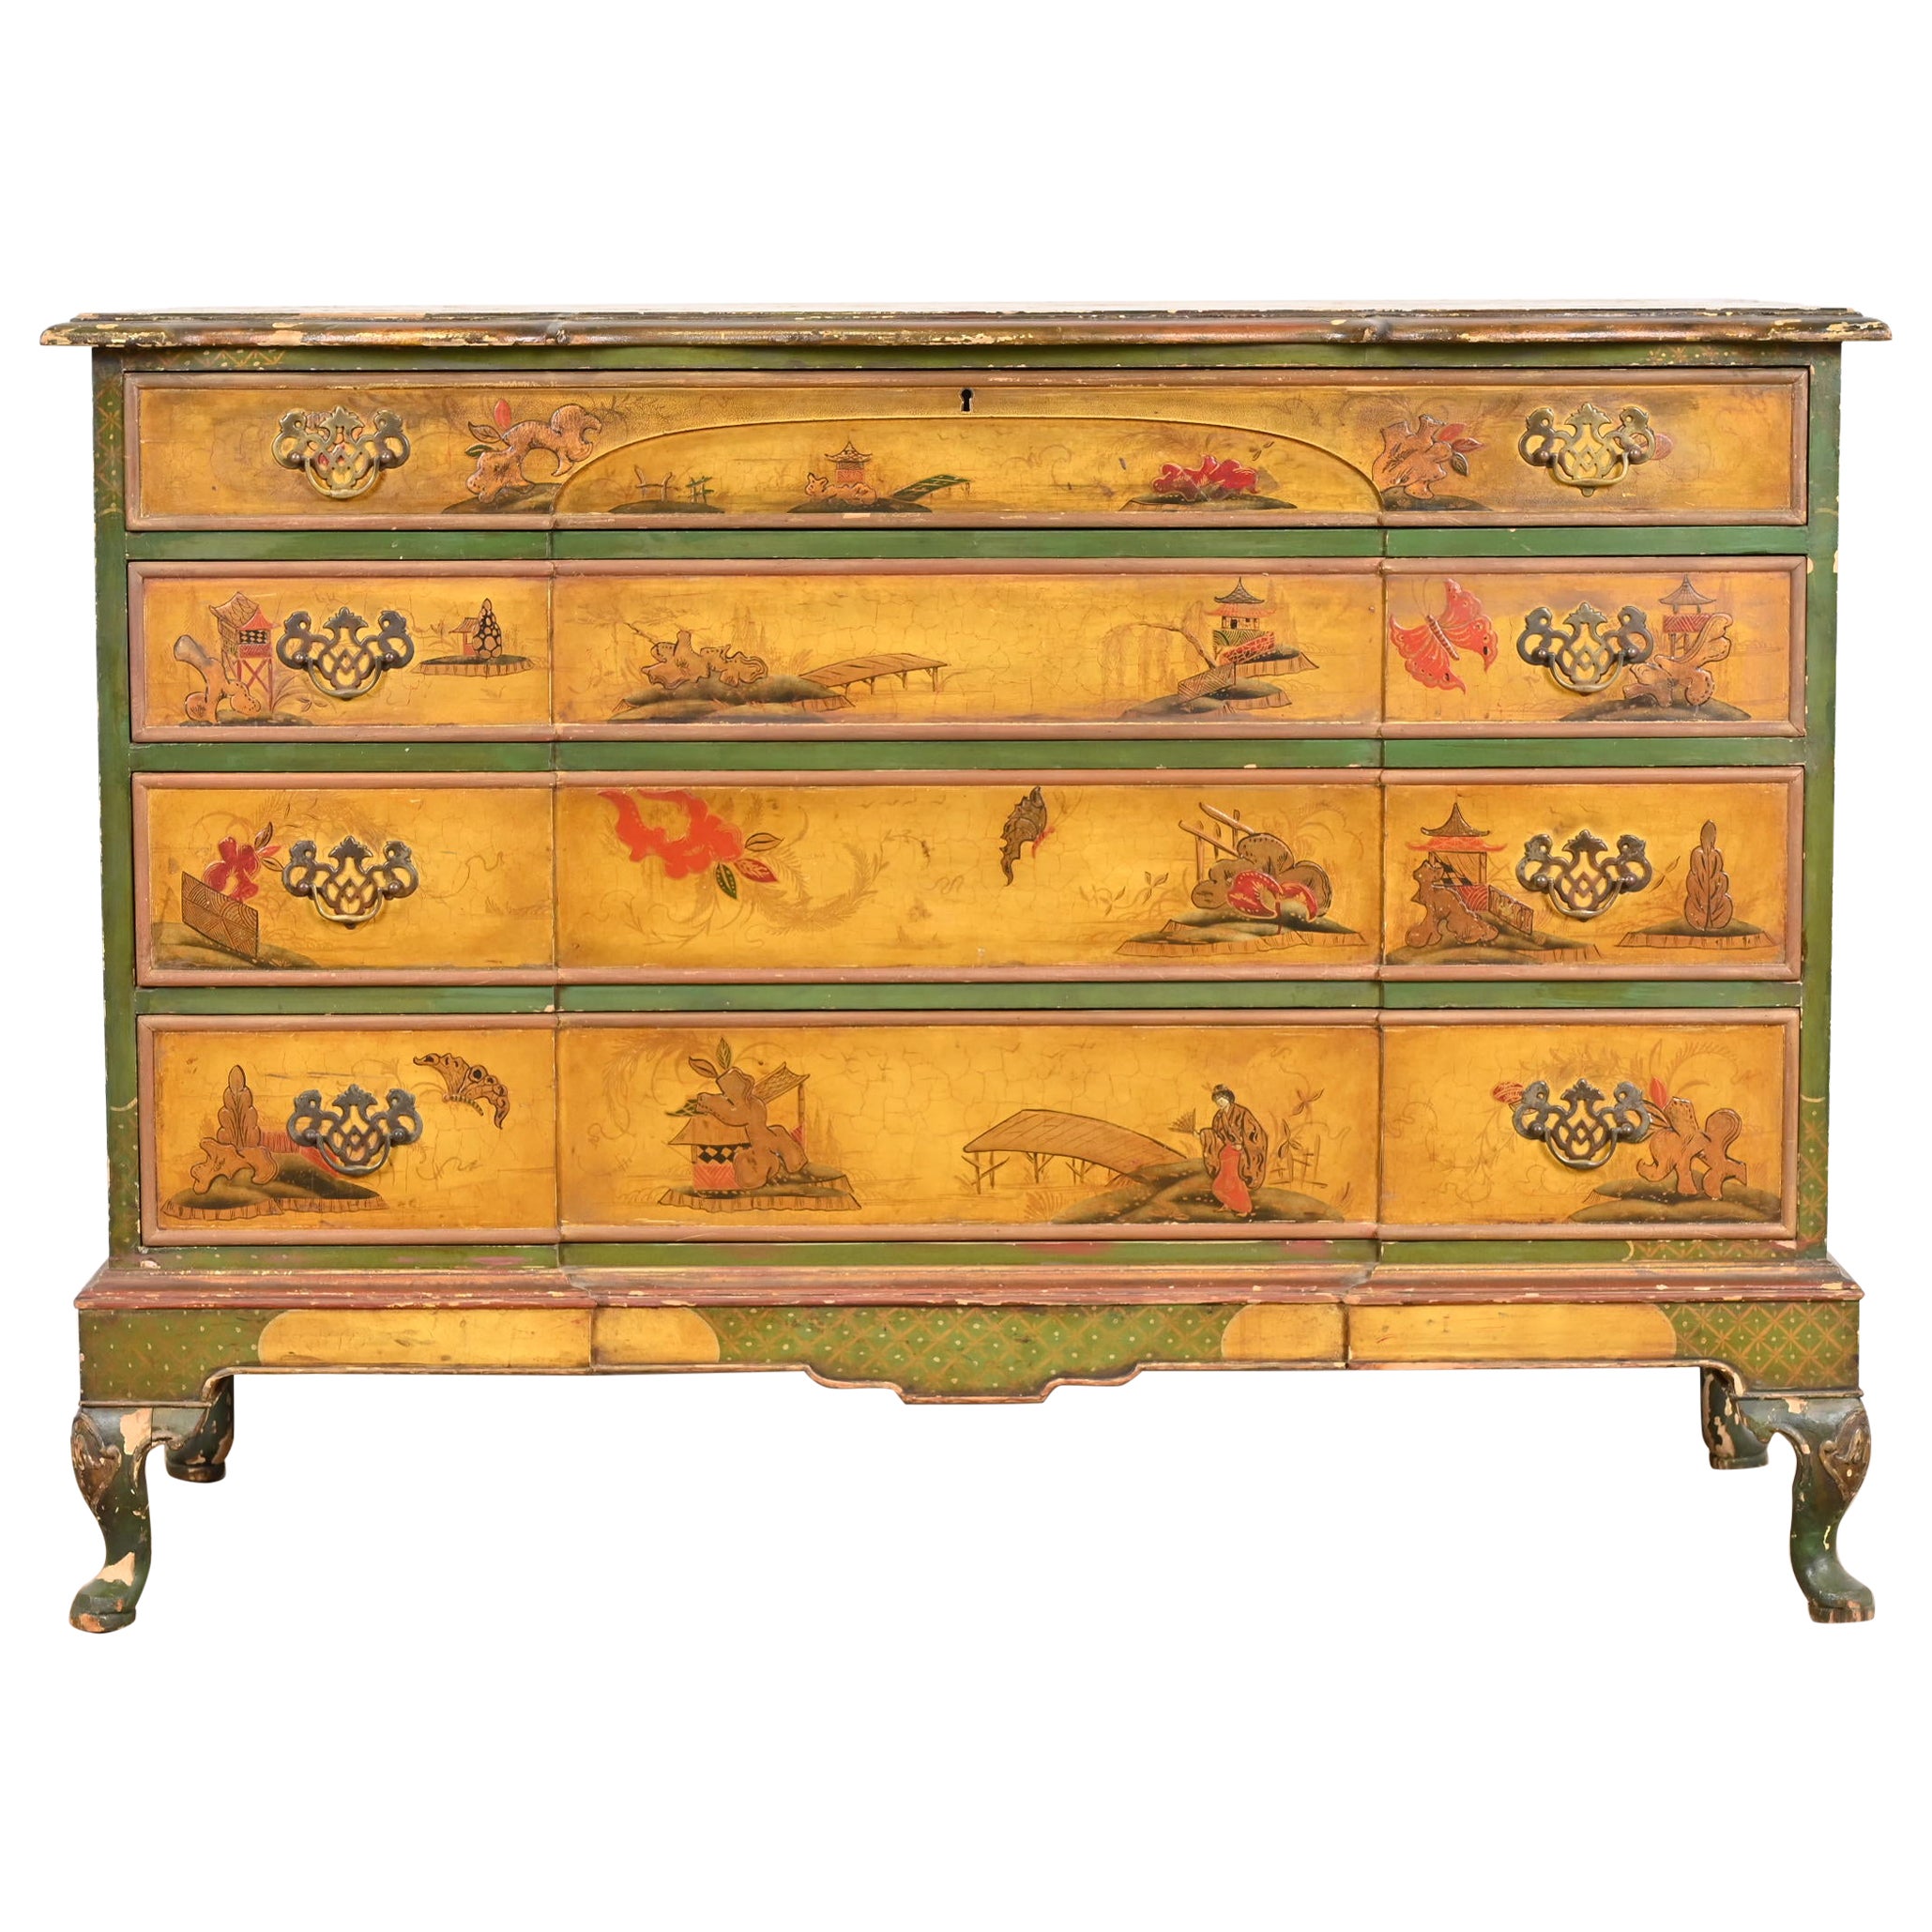 Antique Japanned Chinoiserie Queen Anne Bureau From Historic Edgecroft Mansion For Sale